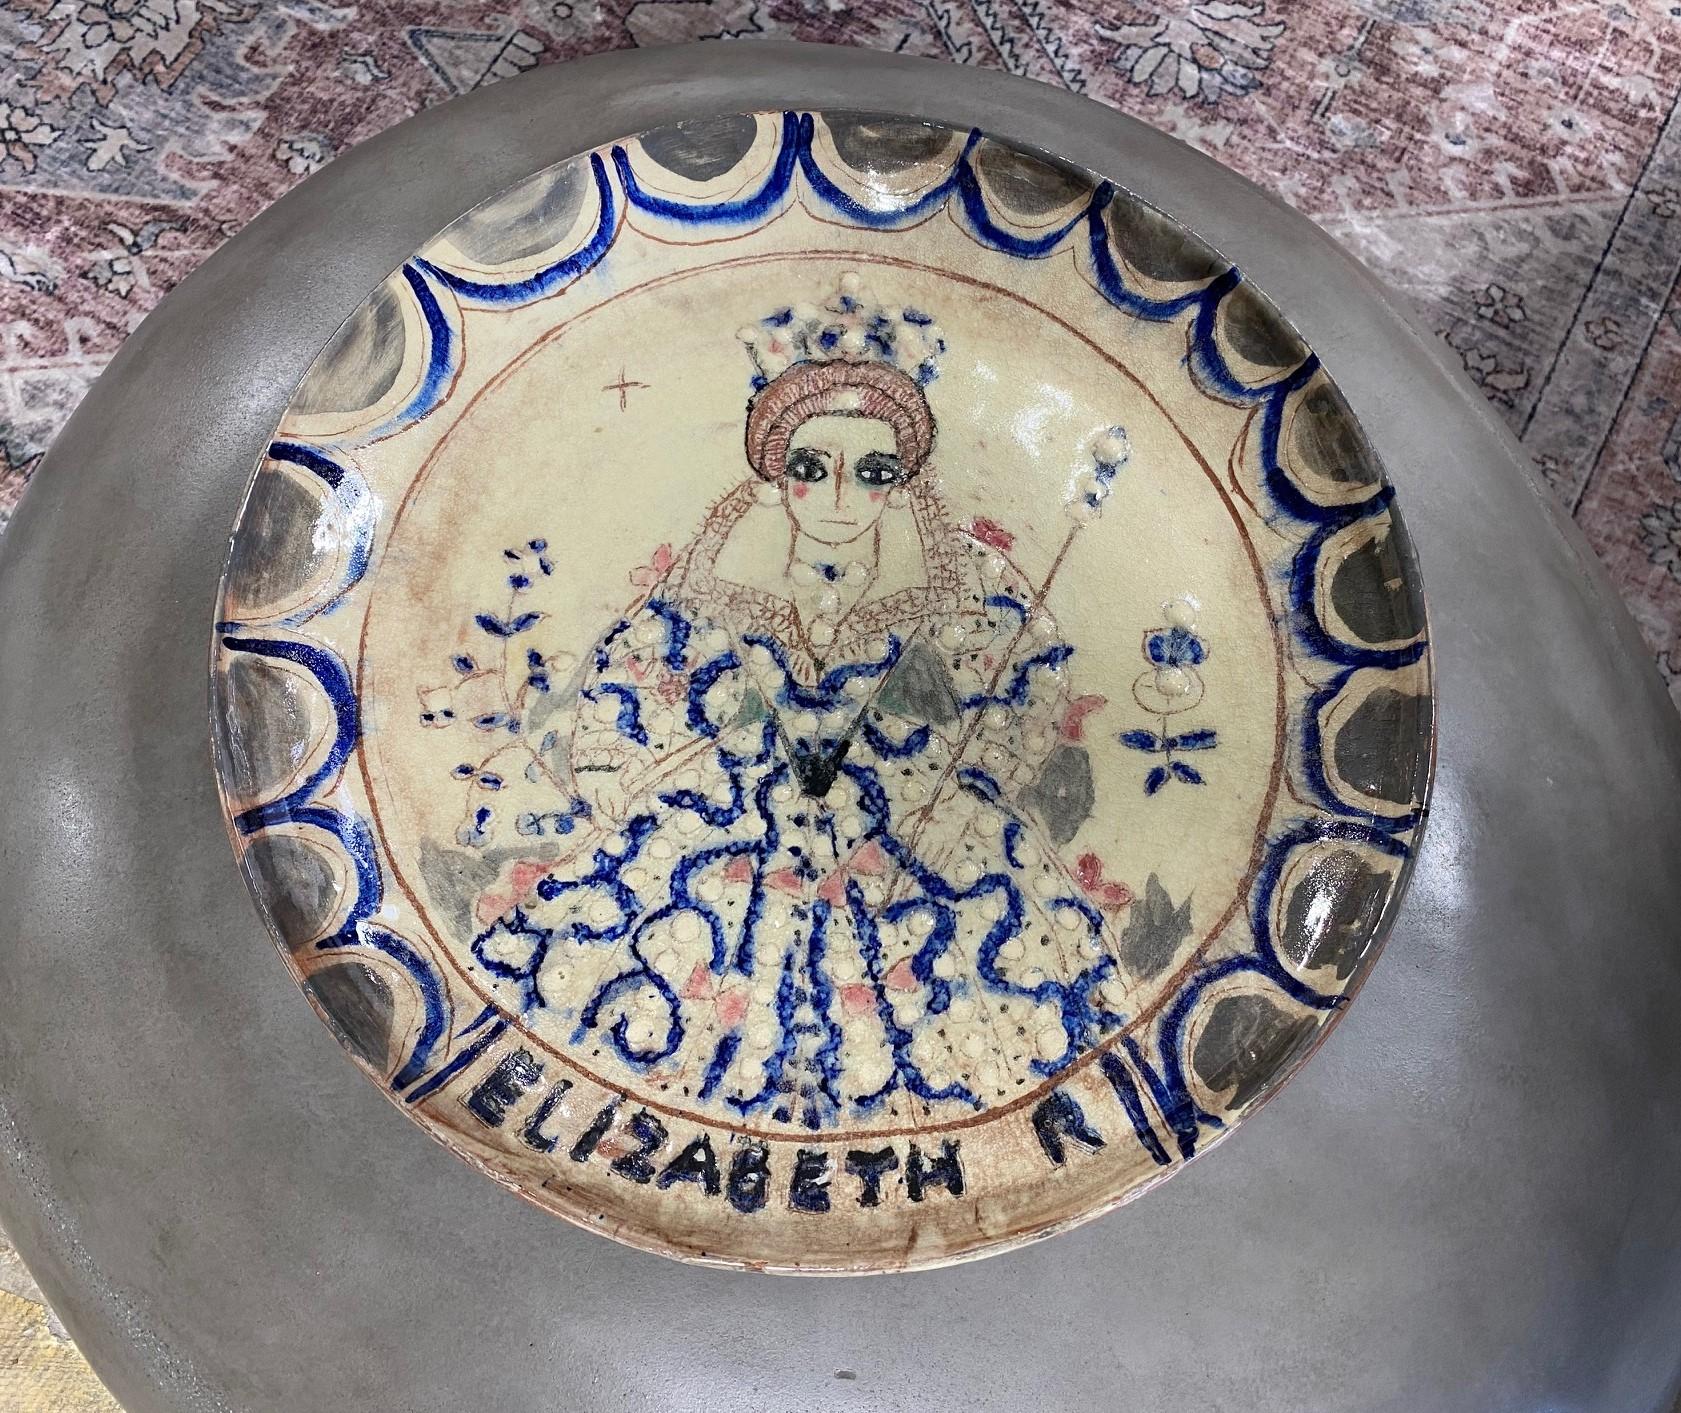 An extremely rare and wonderfully hand-painted monumentally large charger featuring a portrait of Queen Elizabeth - a quite unique and bold work by famed American/ California studio pottery ceramist Beatrice Wood. The portrait of the English Queen